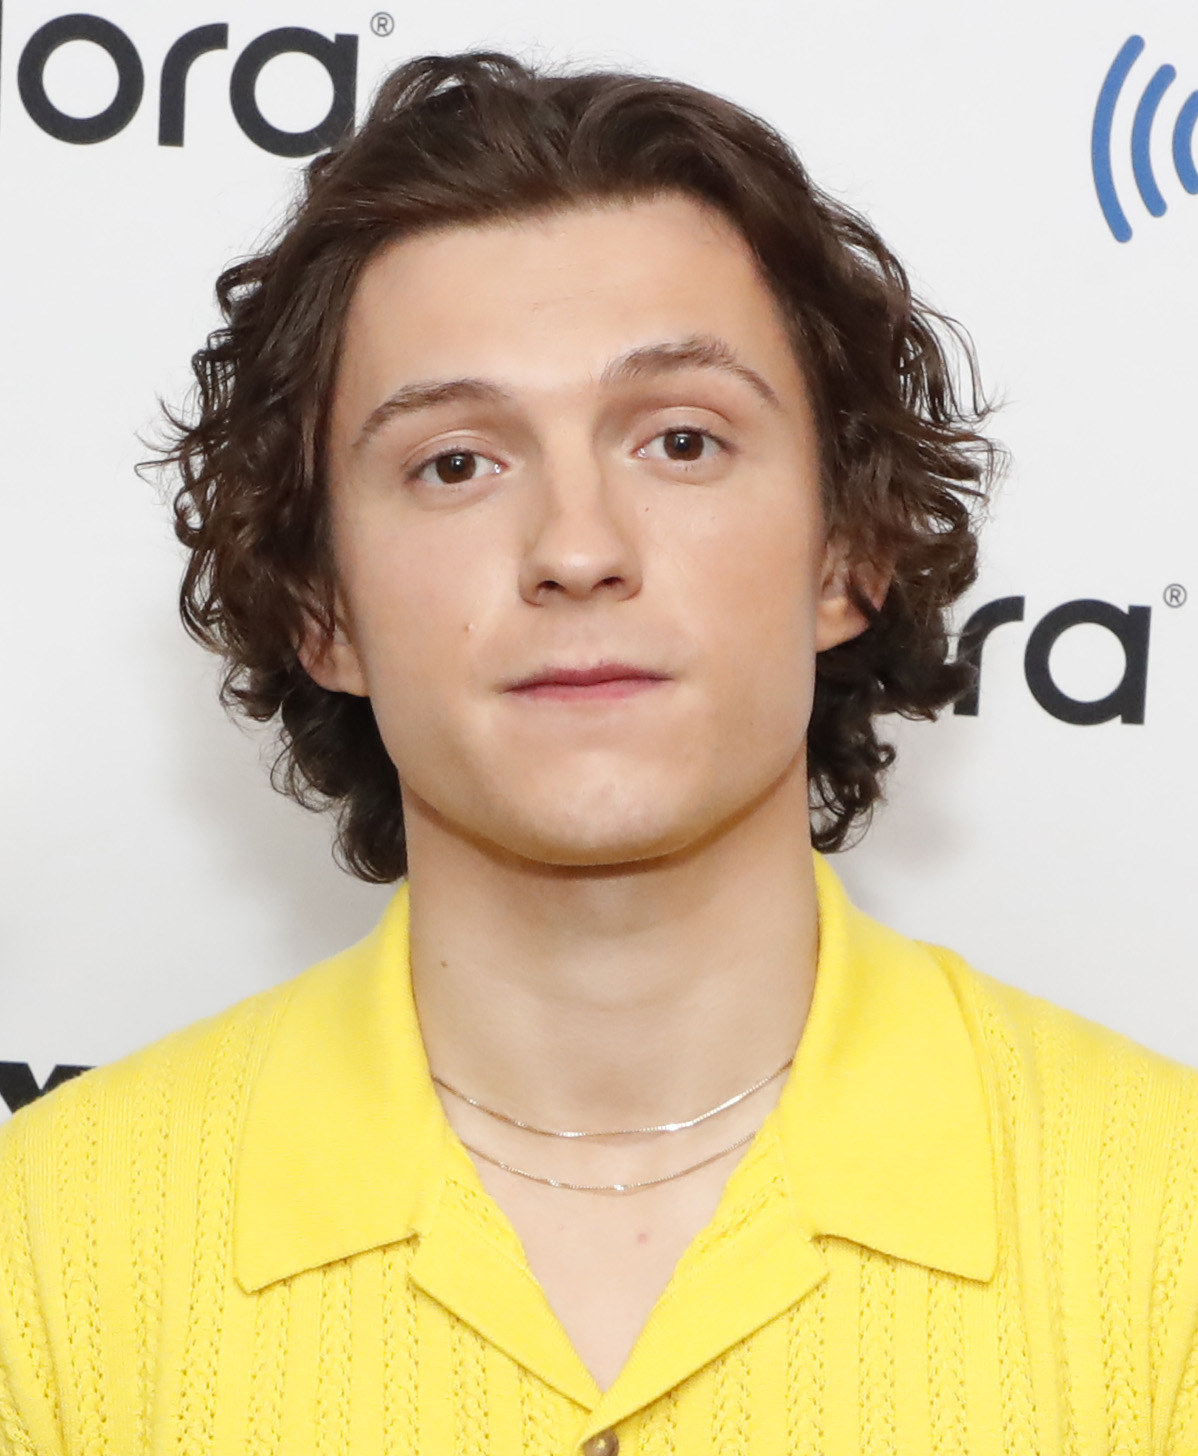 Tom in a yellow sweater on a red carpet